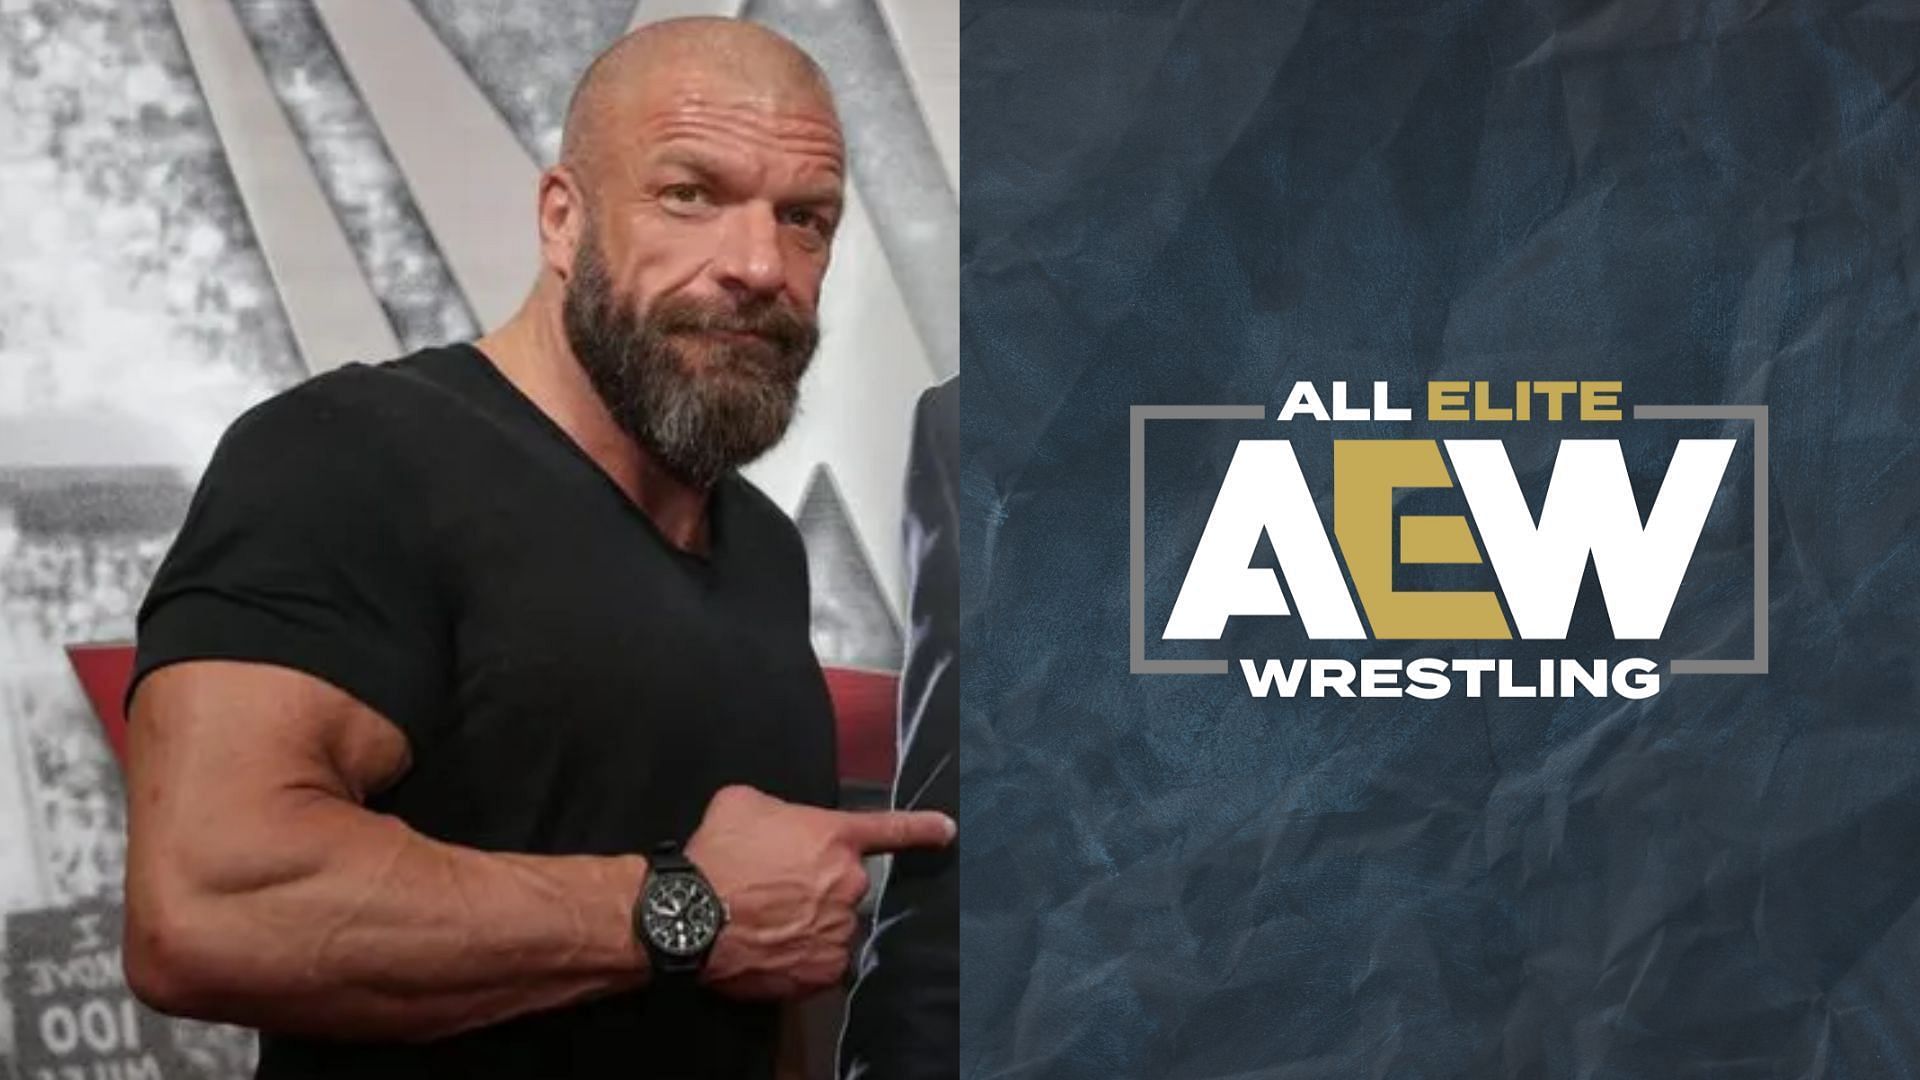 A major AEW star is set to join WWE as per reports